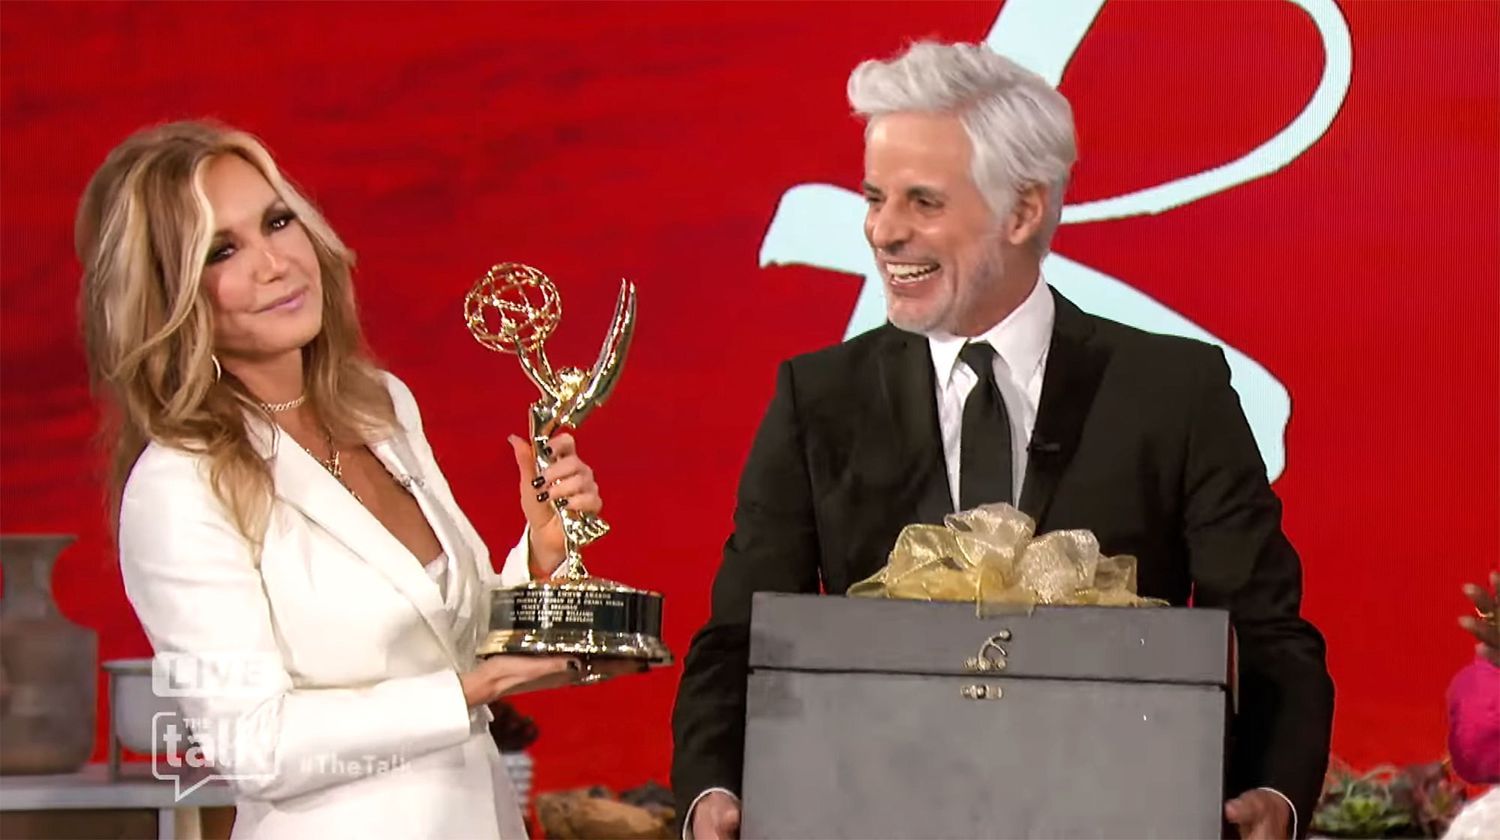 ‘Young and the Restless’ star Tracey E. Bregman gets new Emmy after hers melted in a fire